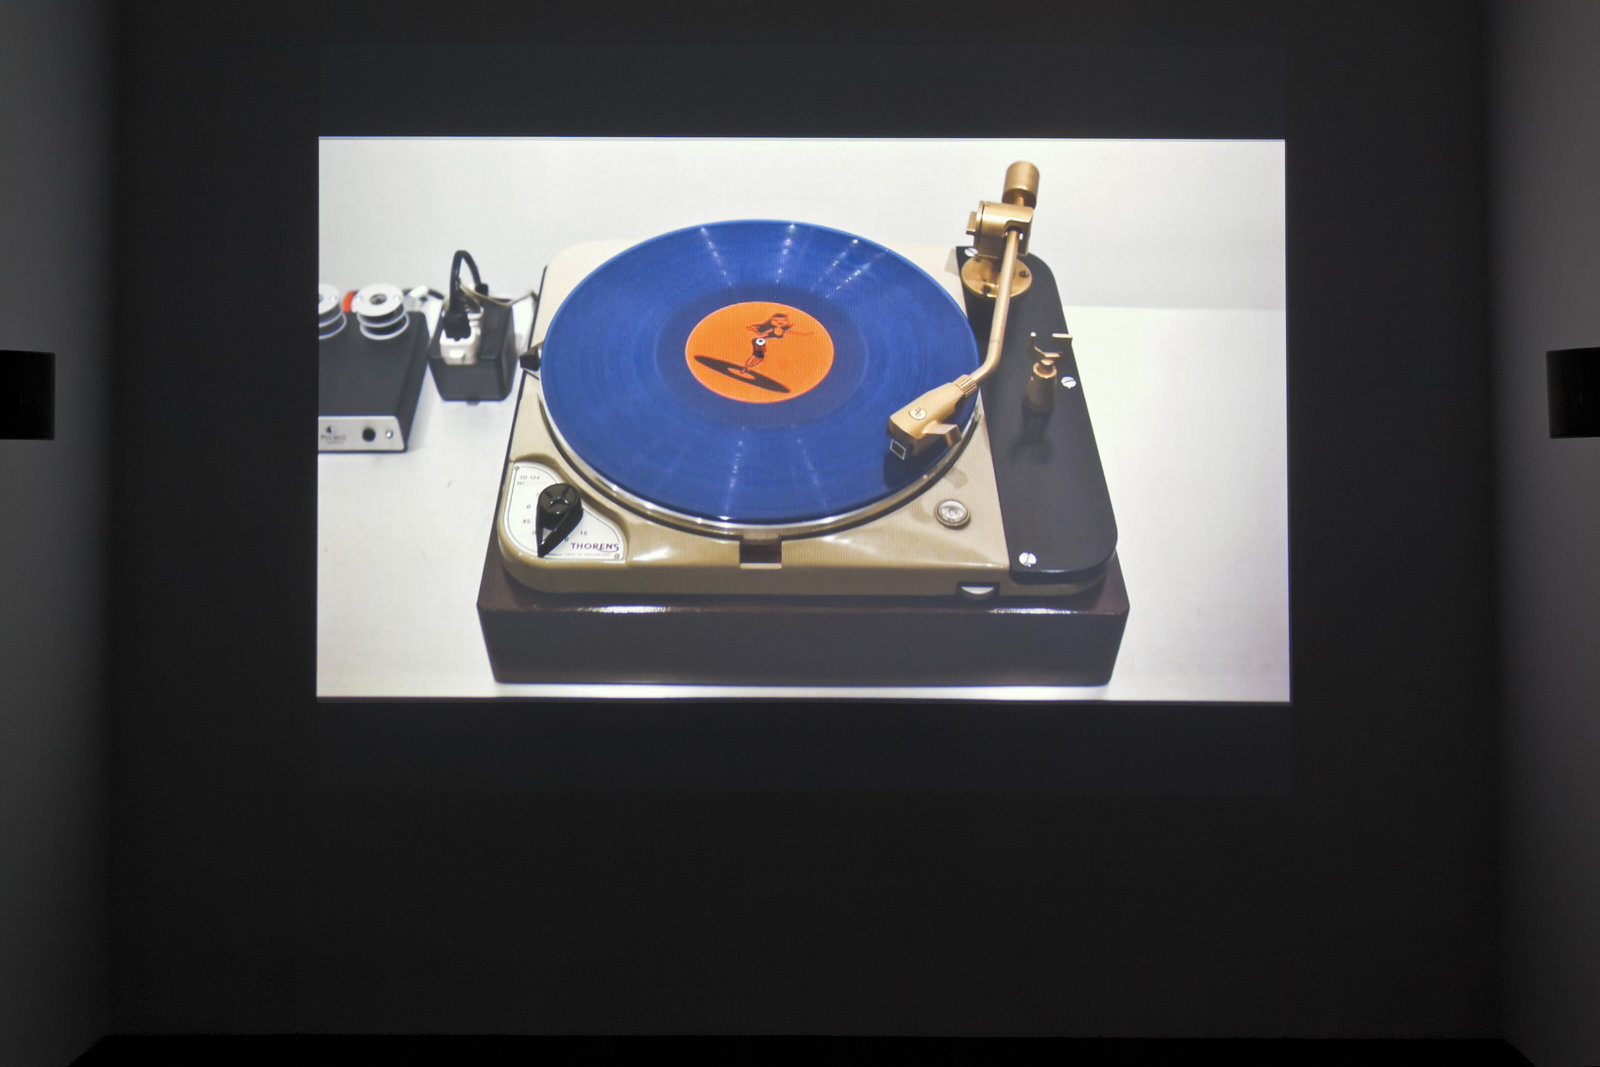 Ron Terada, Soundtrack for an Exhibition, 2010, projection played from mac mini, dimensions variable